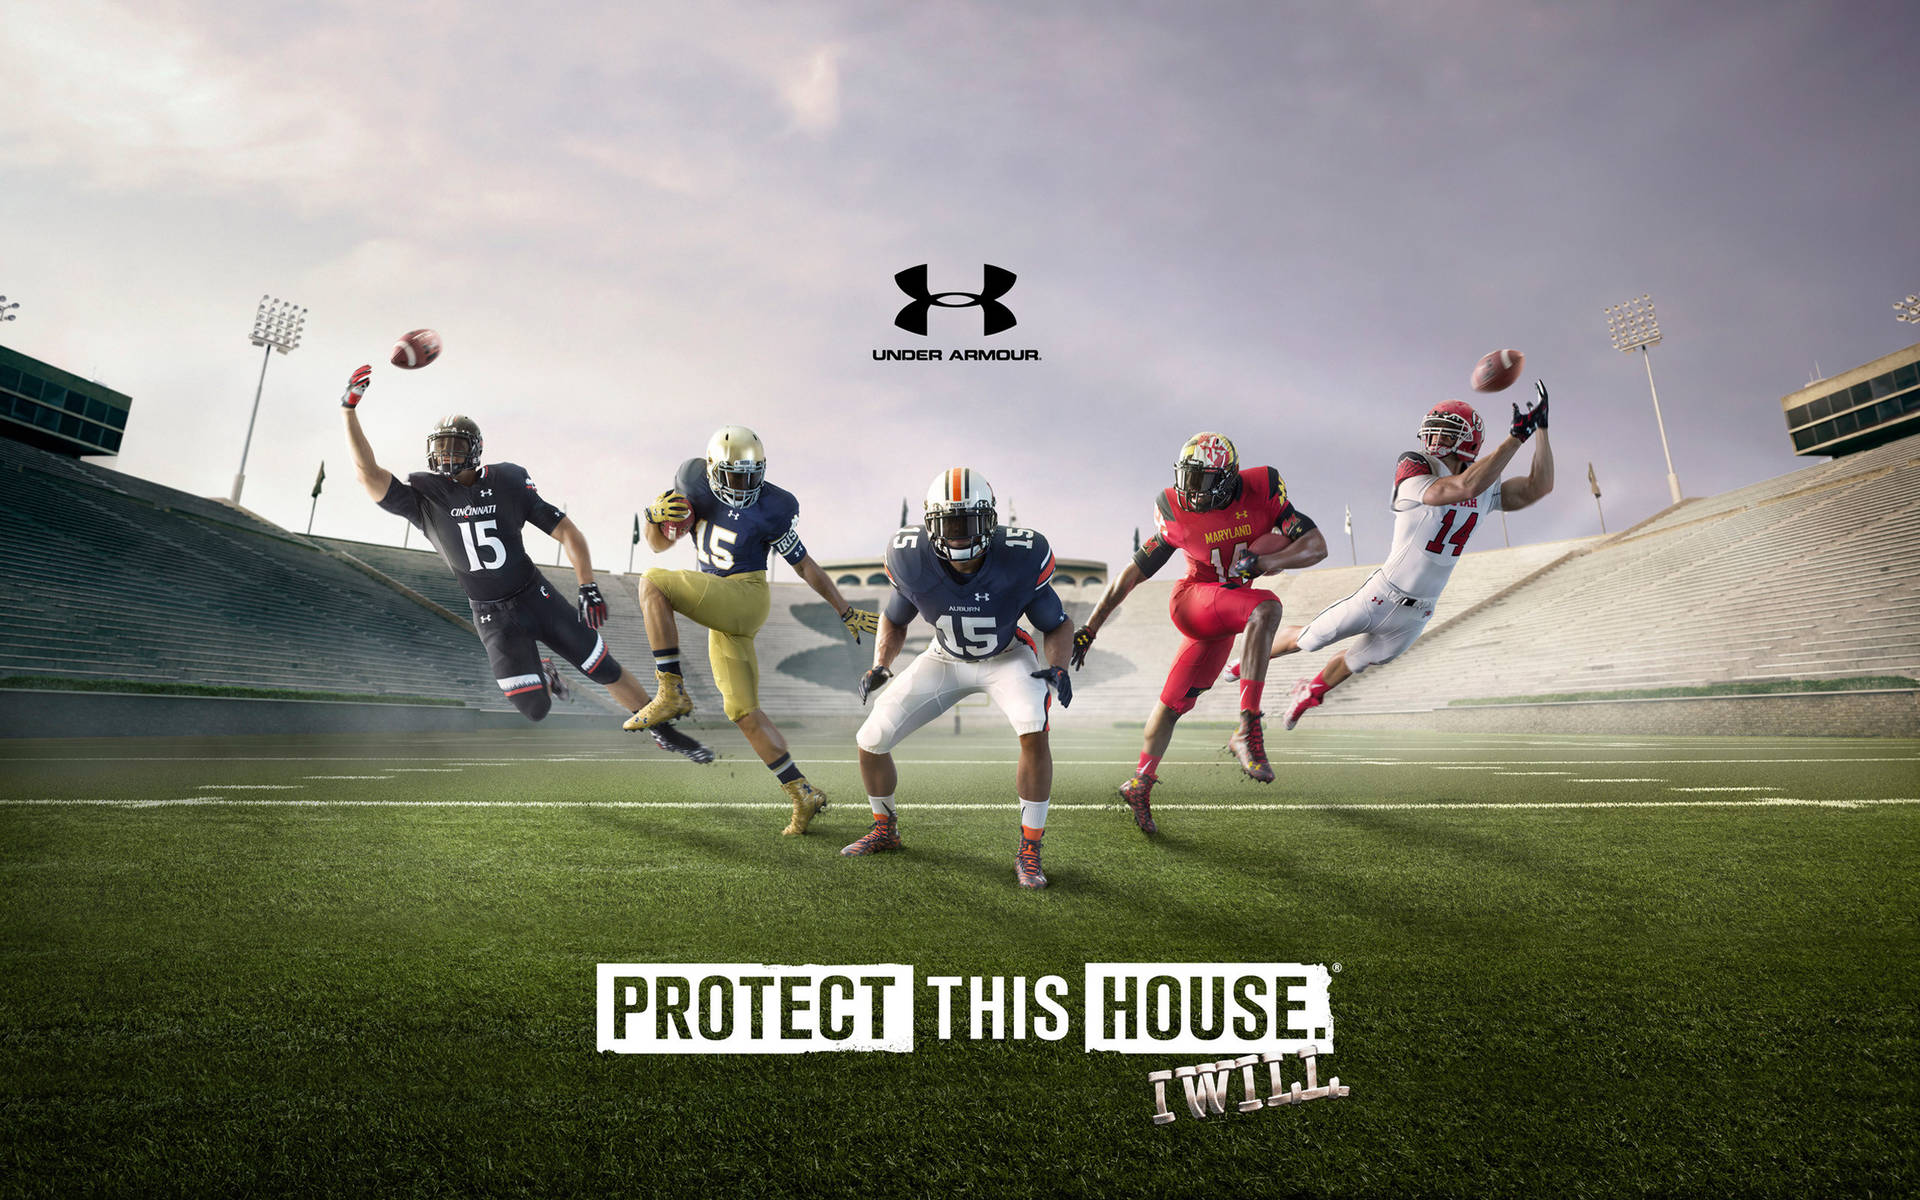 Under Armour Protect This House Background